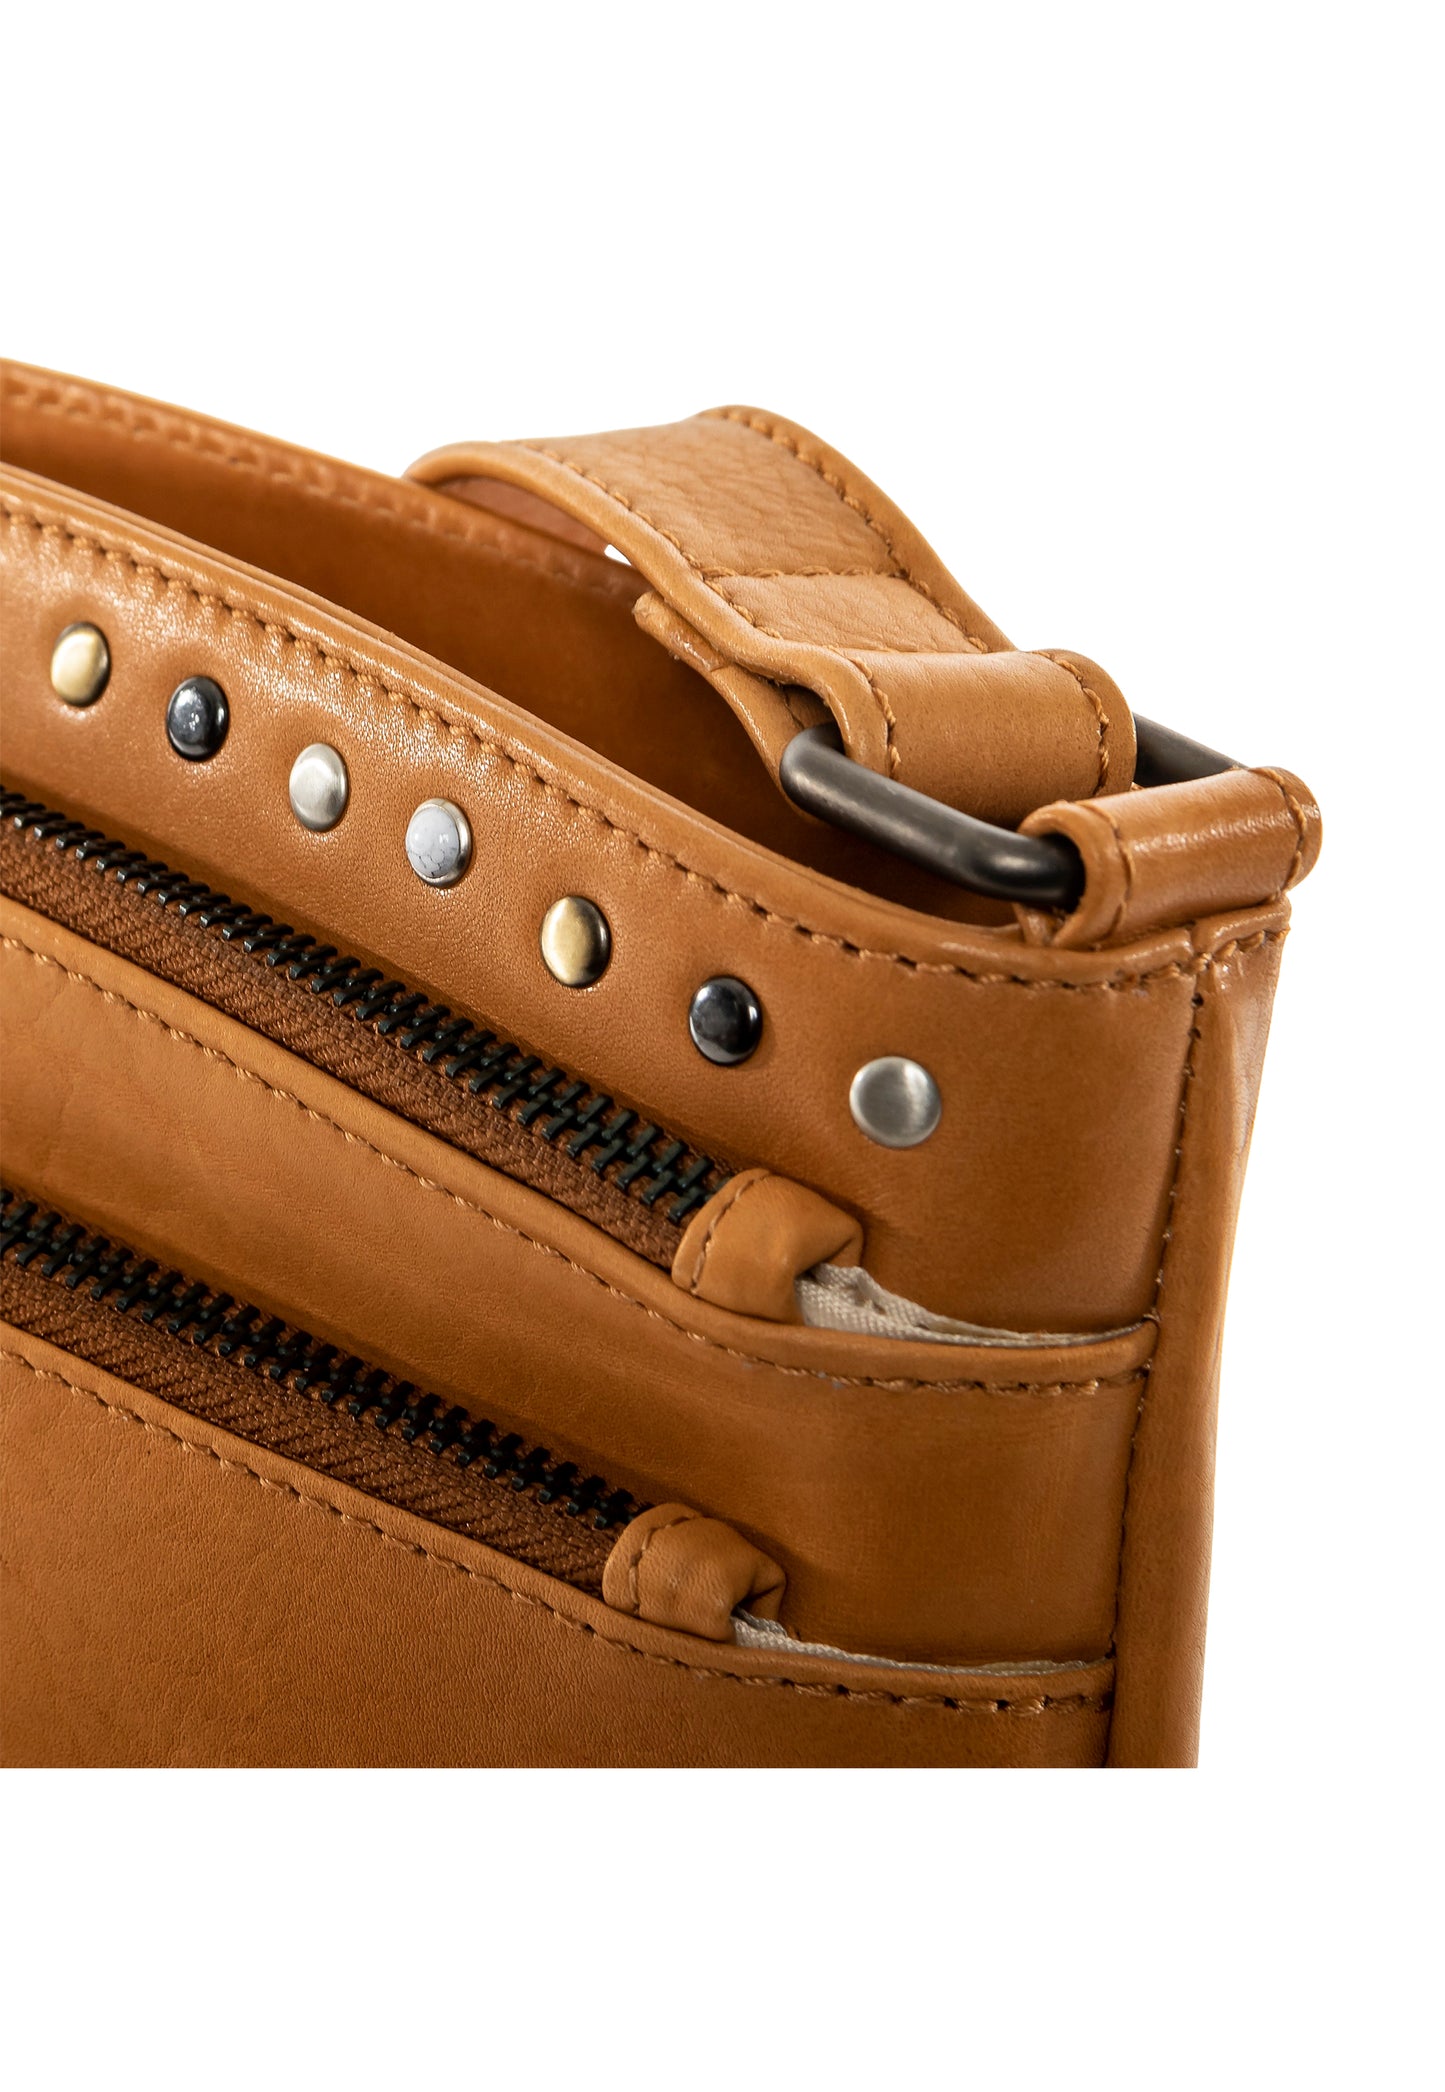 Close view of studs on concealed carry leather purse